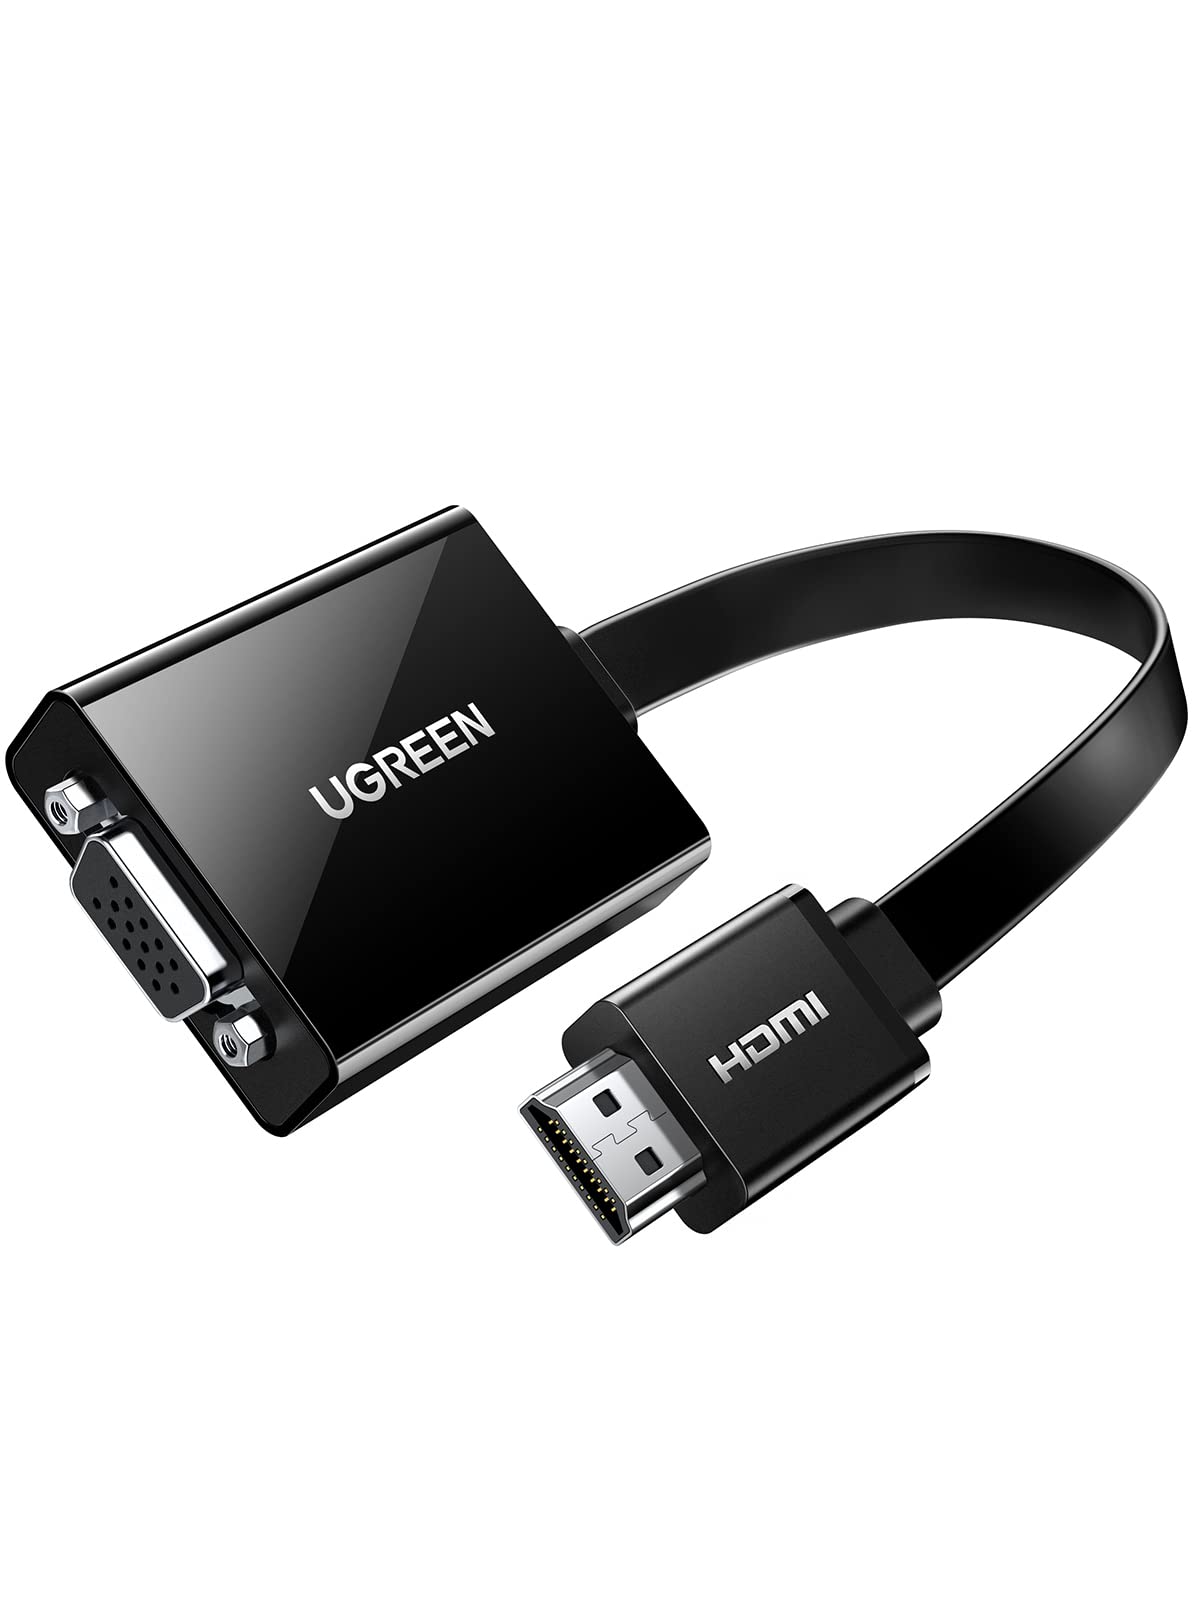 Ugreen Active HDMI to VGA Adapter Converter with 3.5 mm Audio Jack up to 1920 * 1080@60Hz for PC, Laptop, Ultrabook, Raspberry Pi, Chromebook (Black)